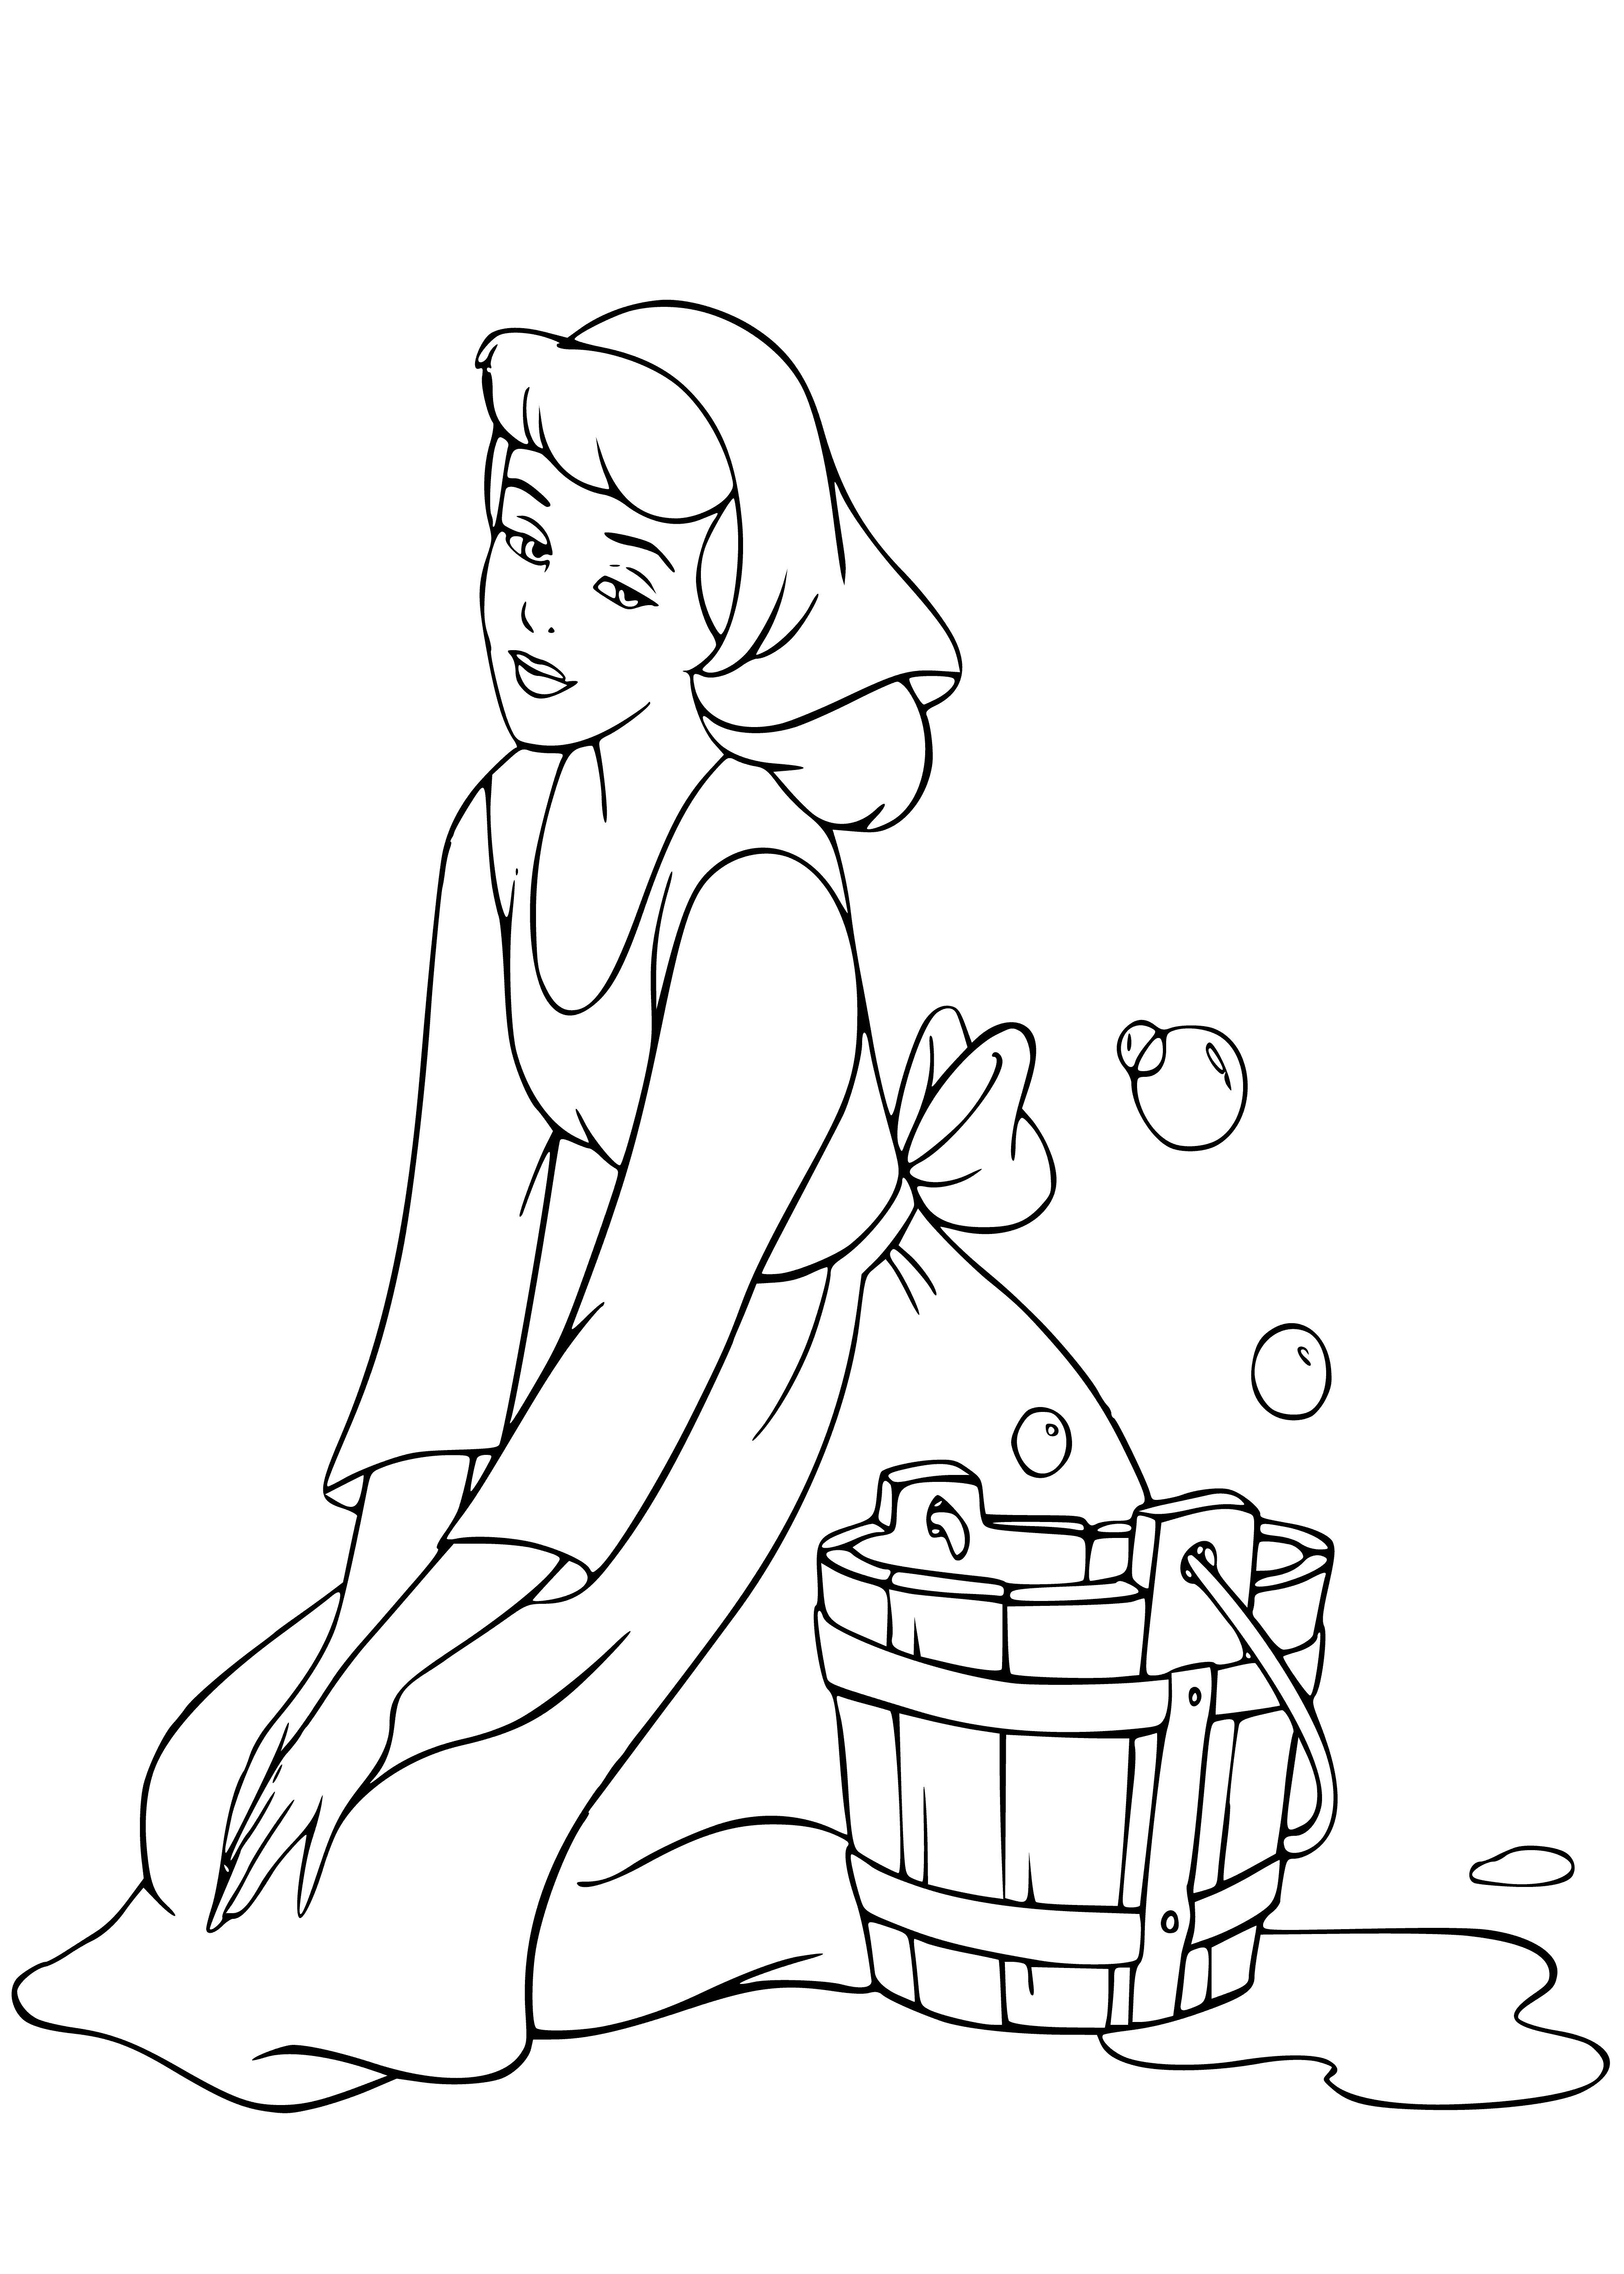 coloring page: Cinderella stands in a pink dress and white apron, scrubbing dishes. Nearby a small stool, with a blue scarf around her head.